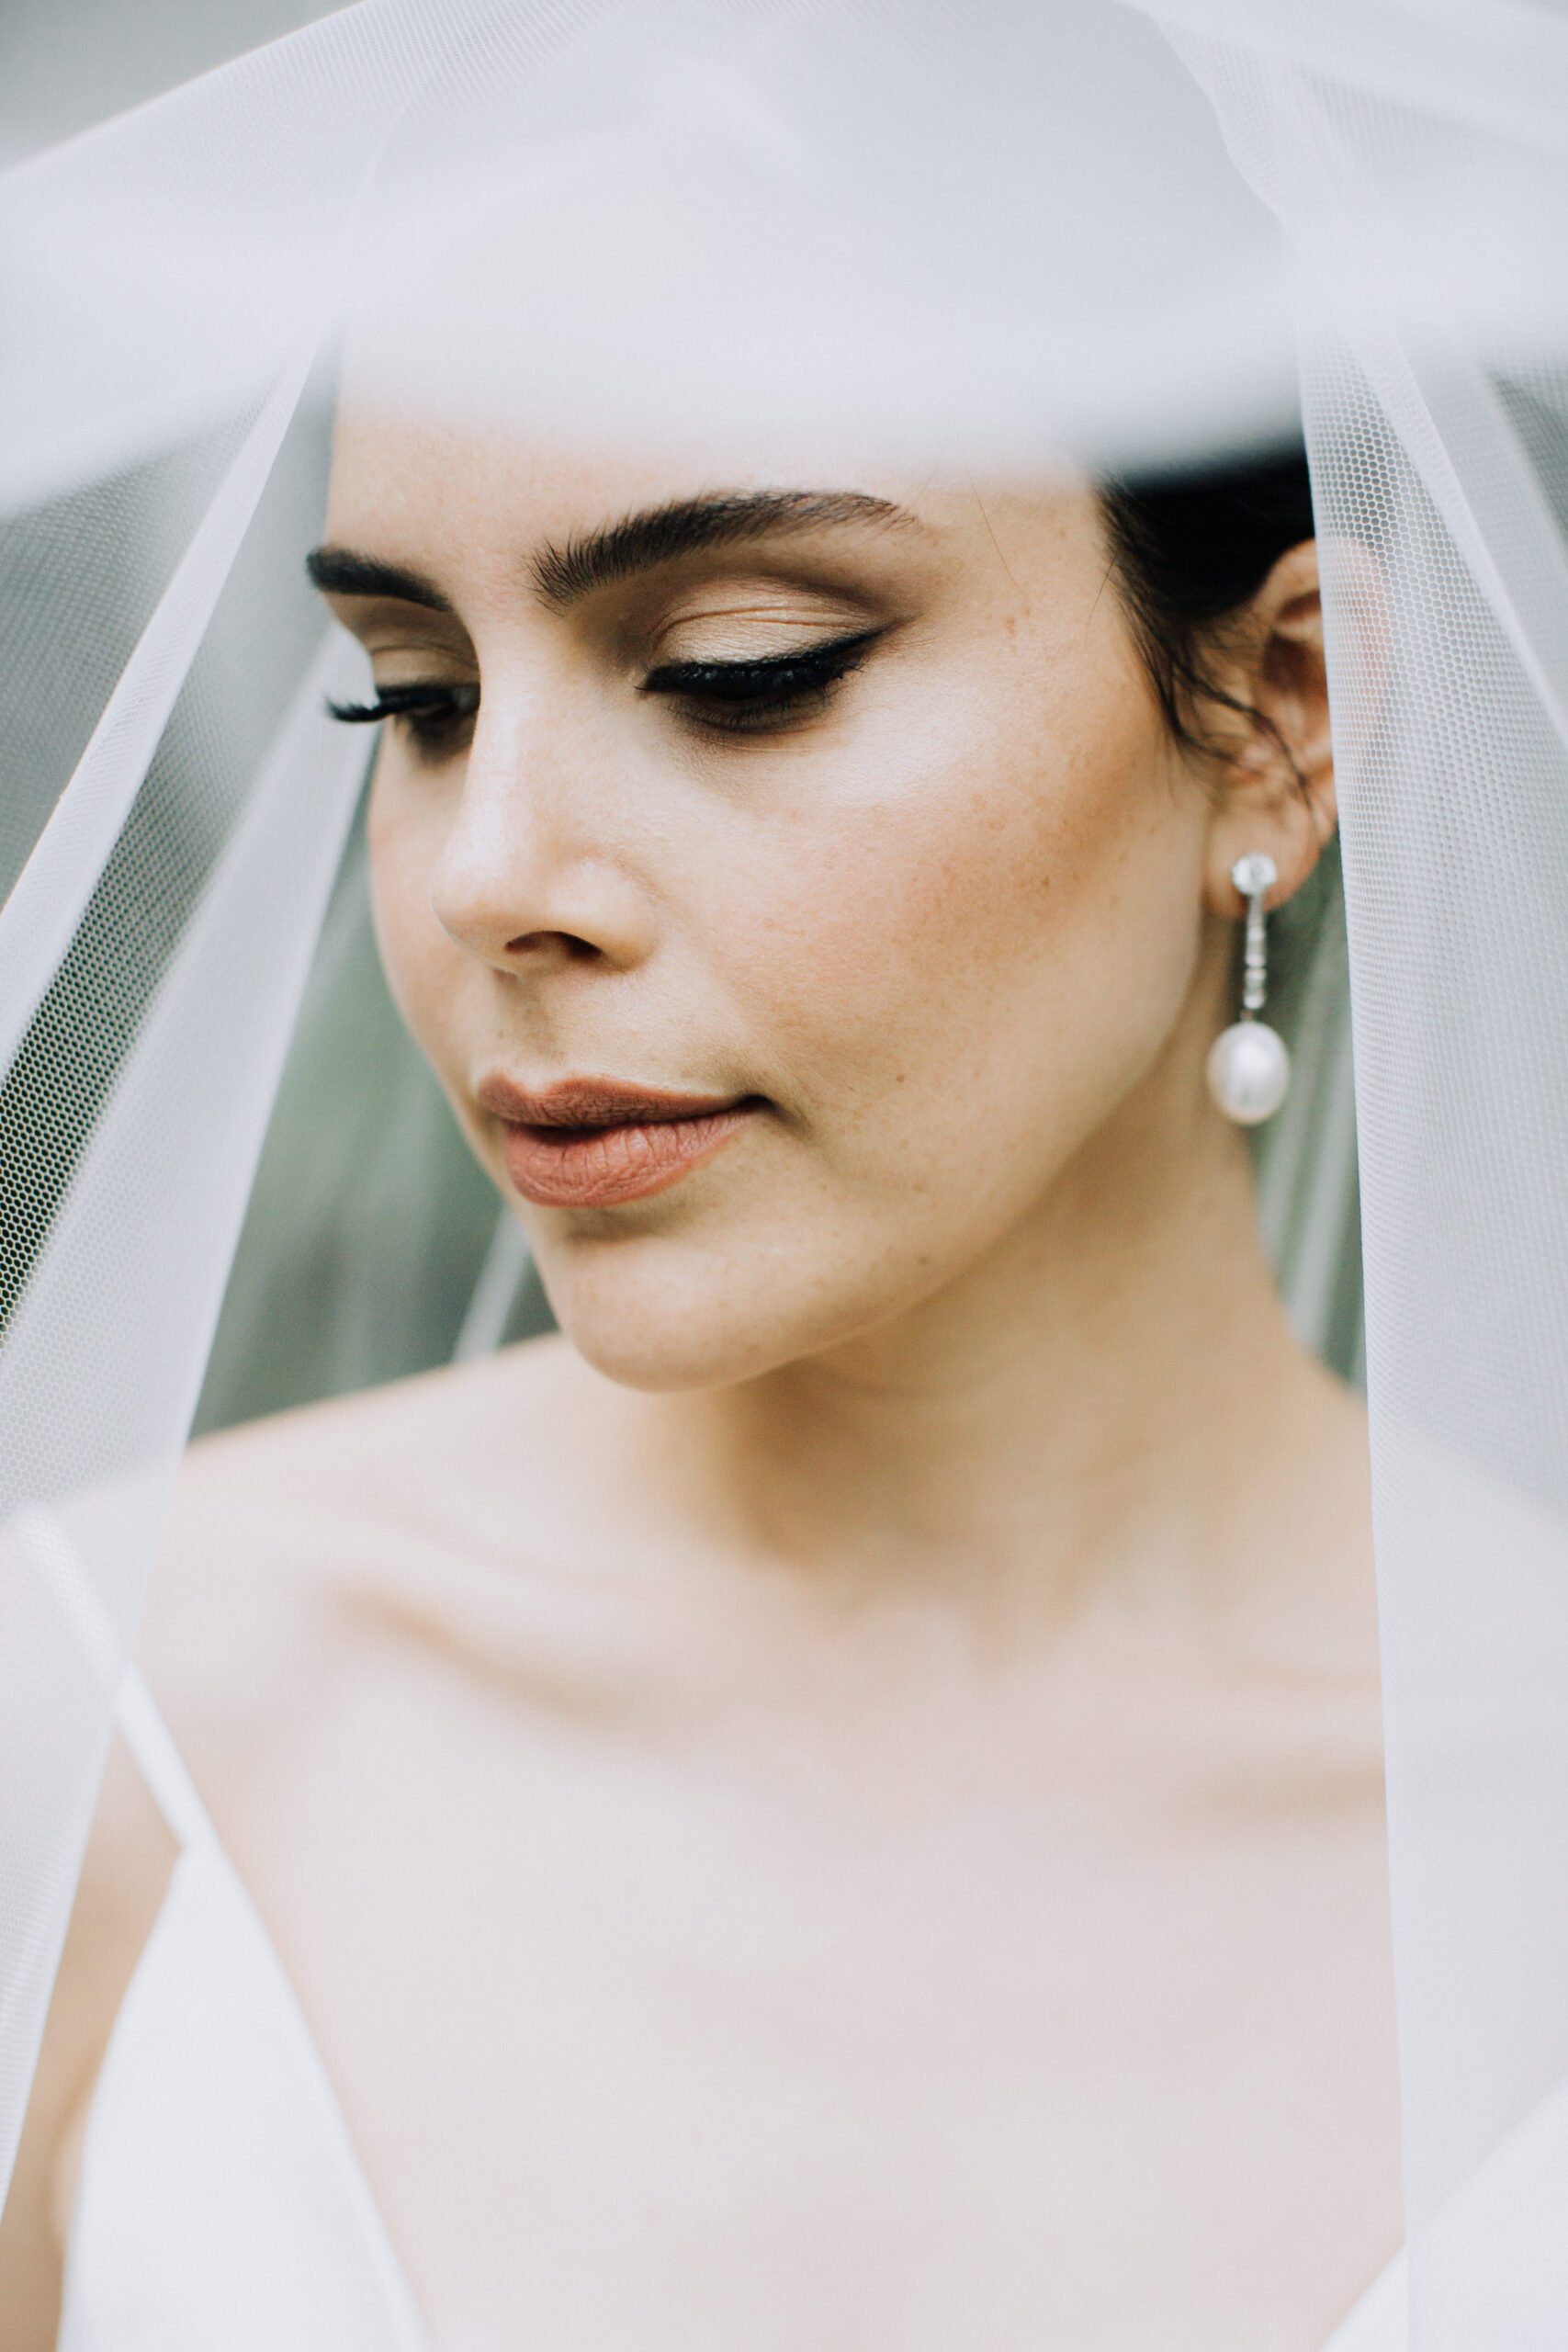 bride poses under her veil during her dreamy wedding bridal portraits